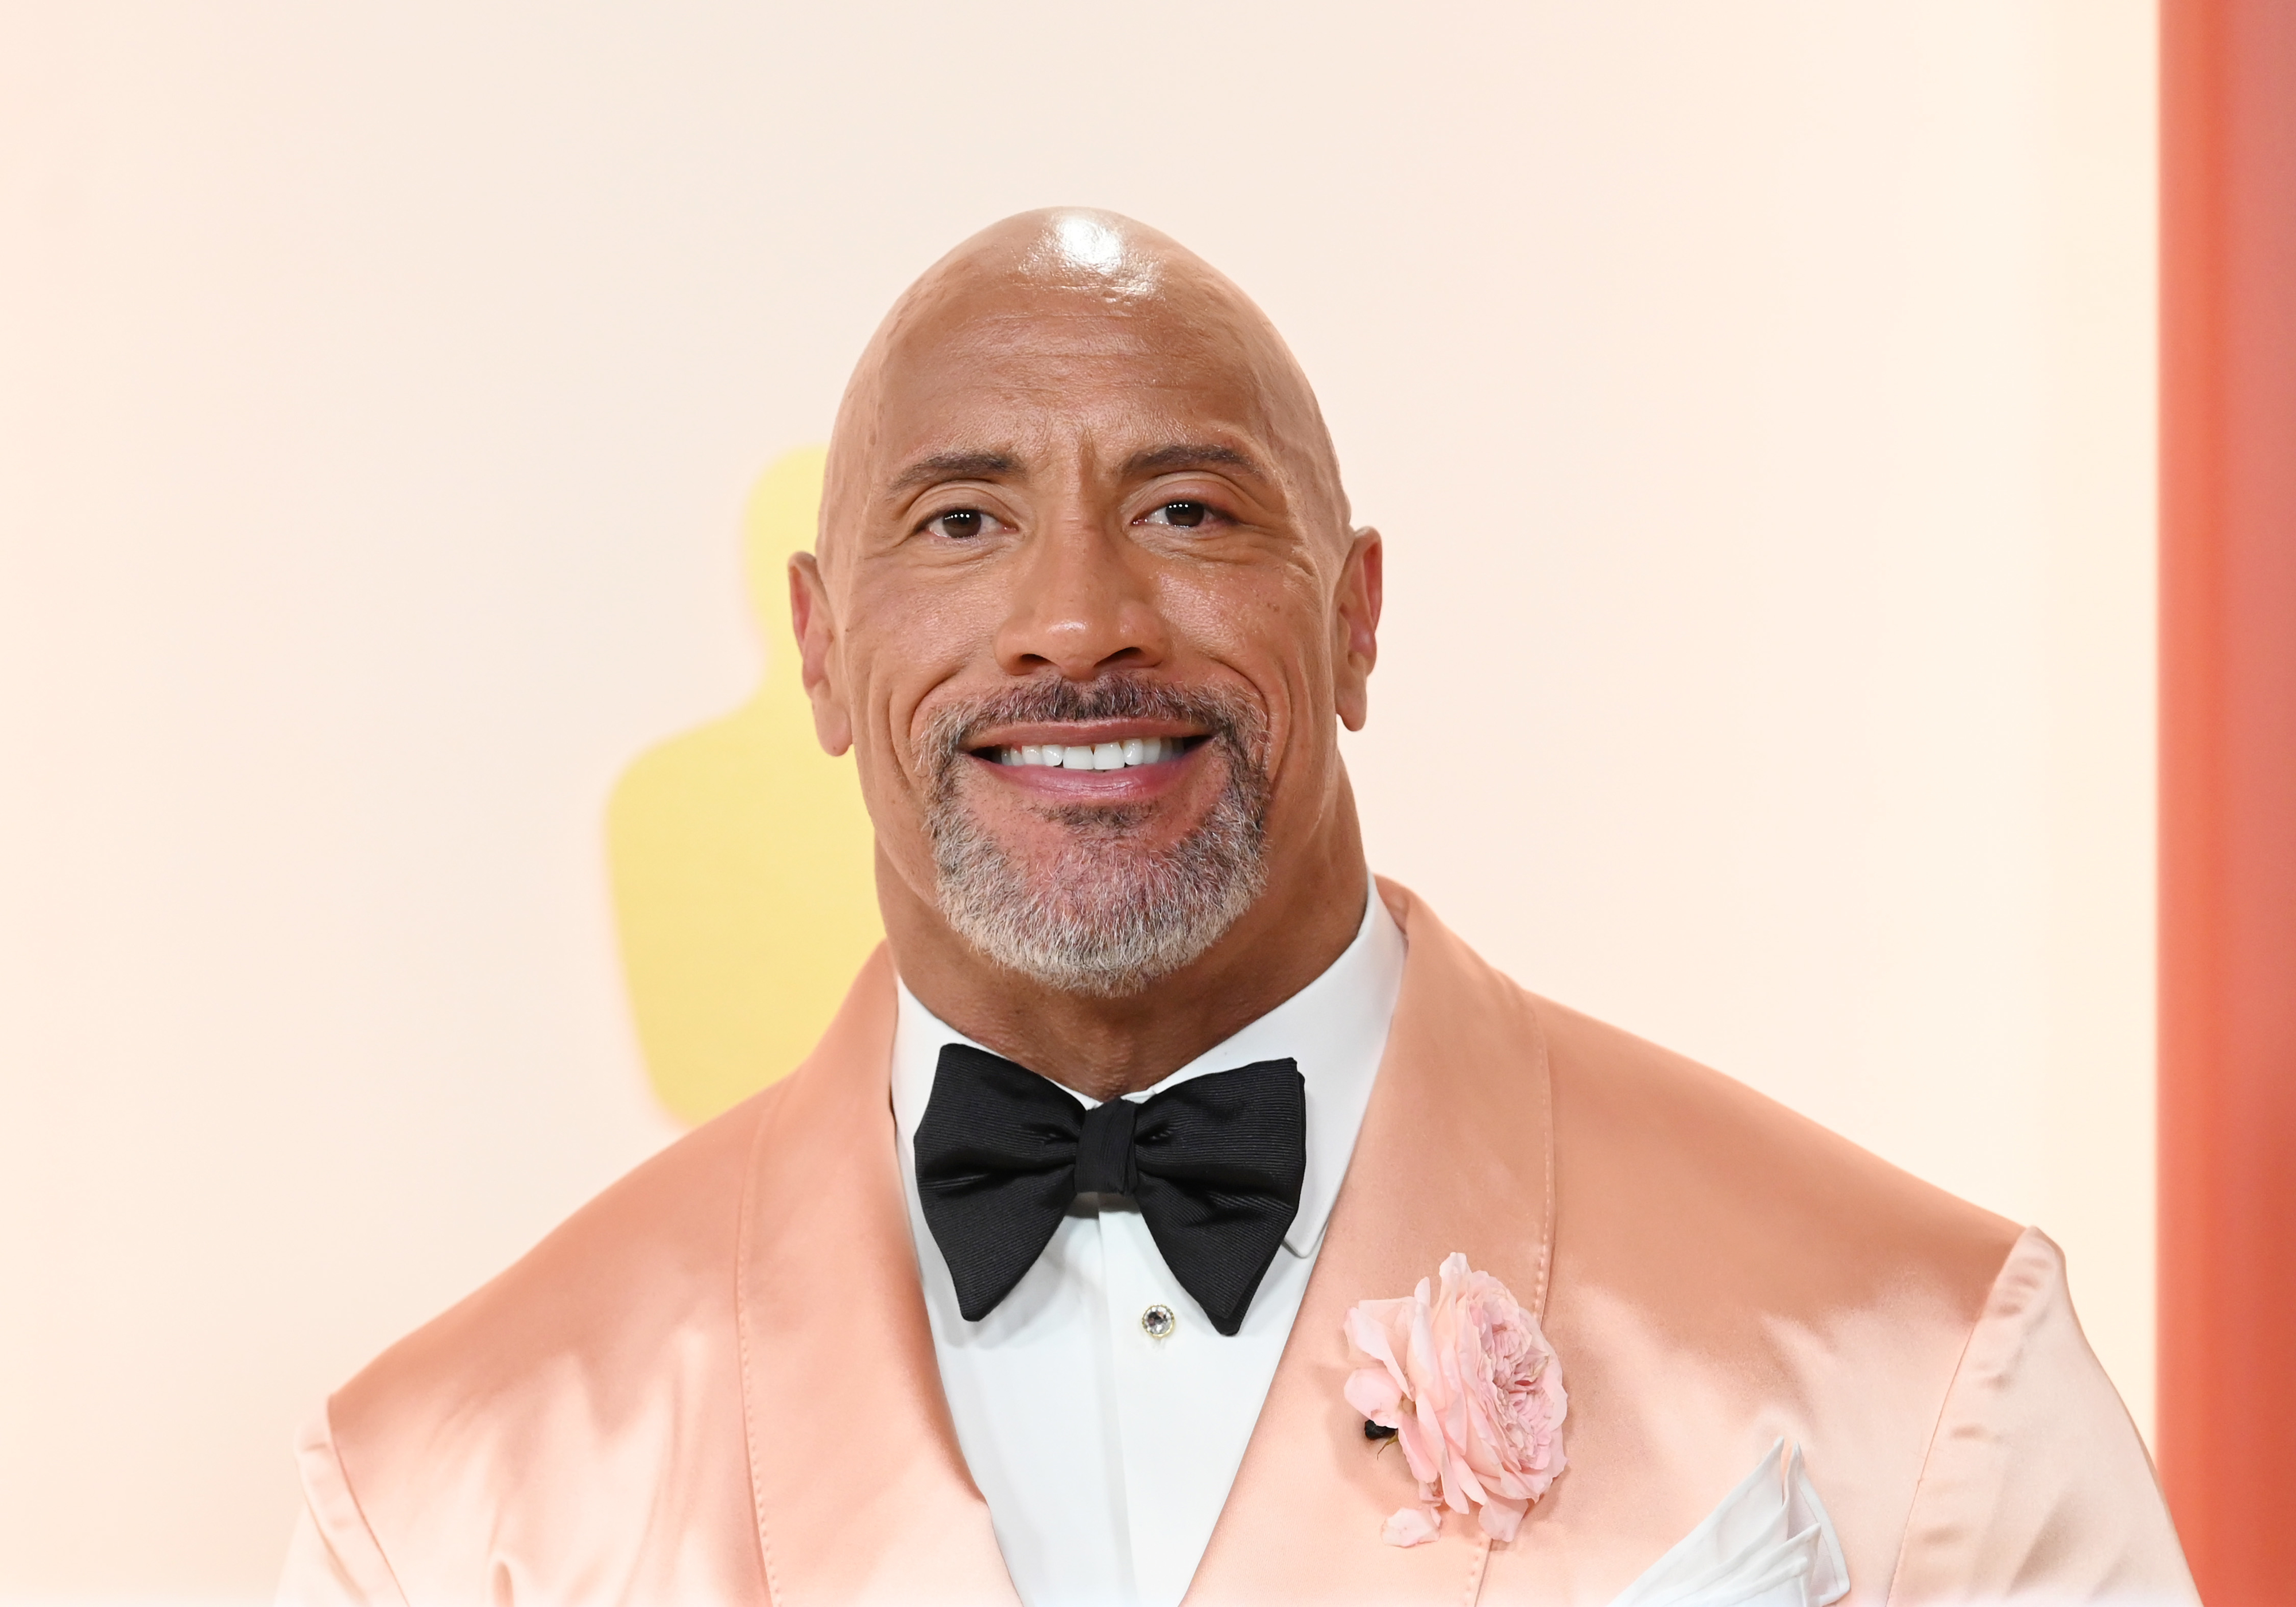 Dwayne in formal attire with a satin tuxedo and flower boutonniere at an event